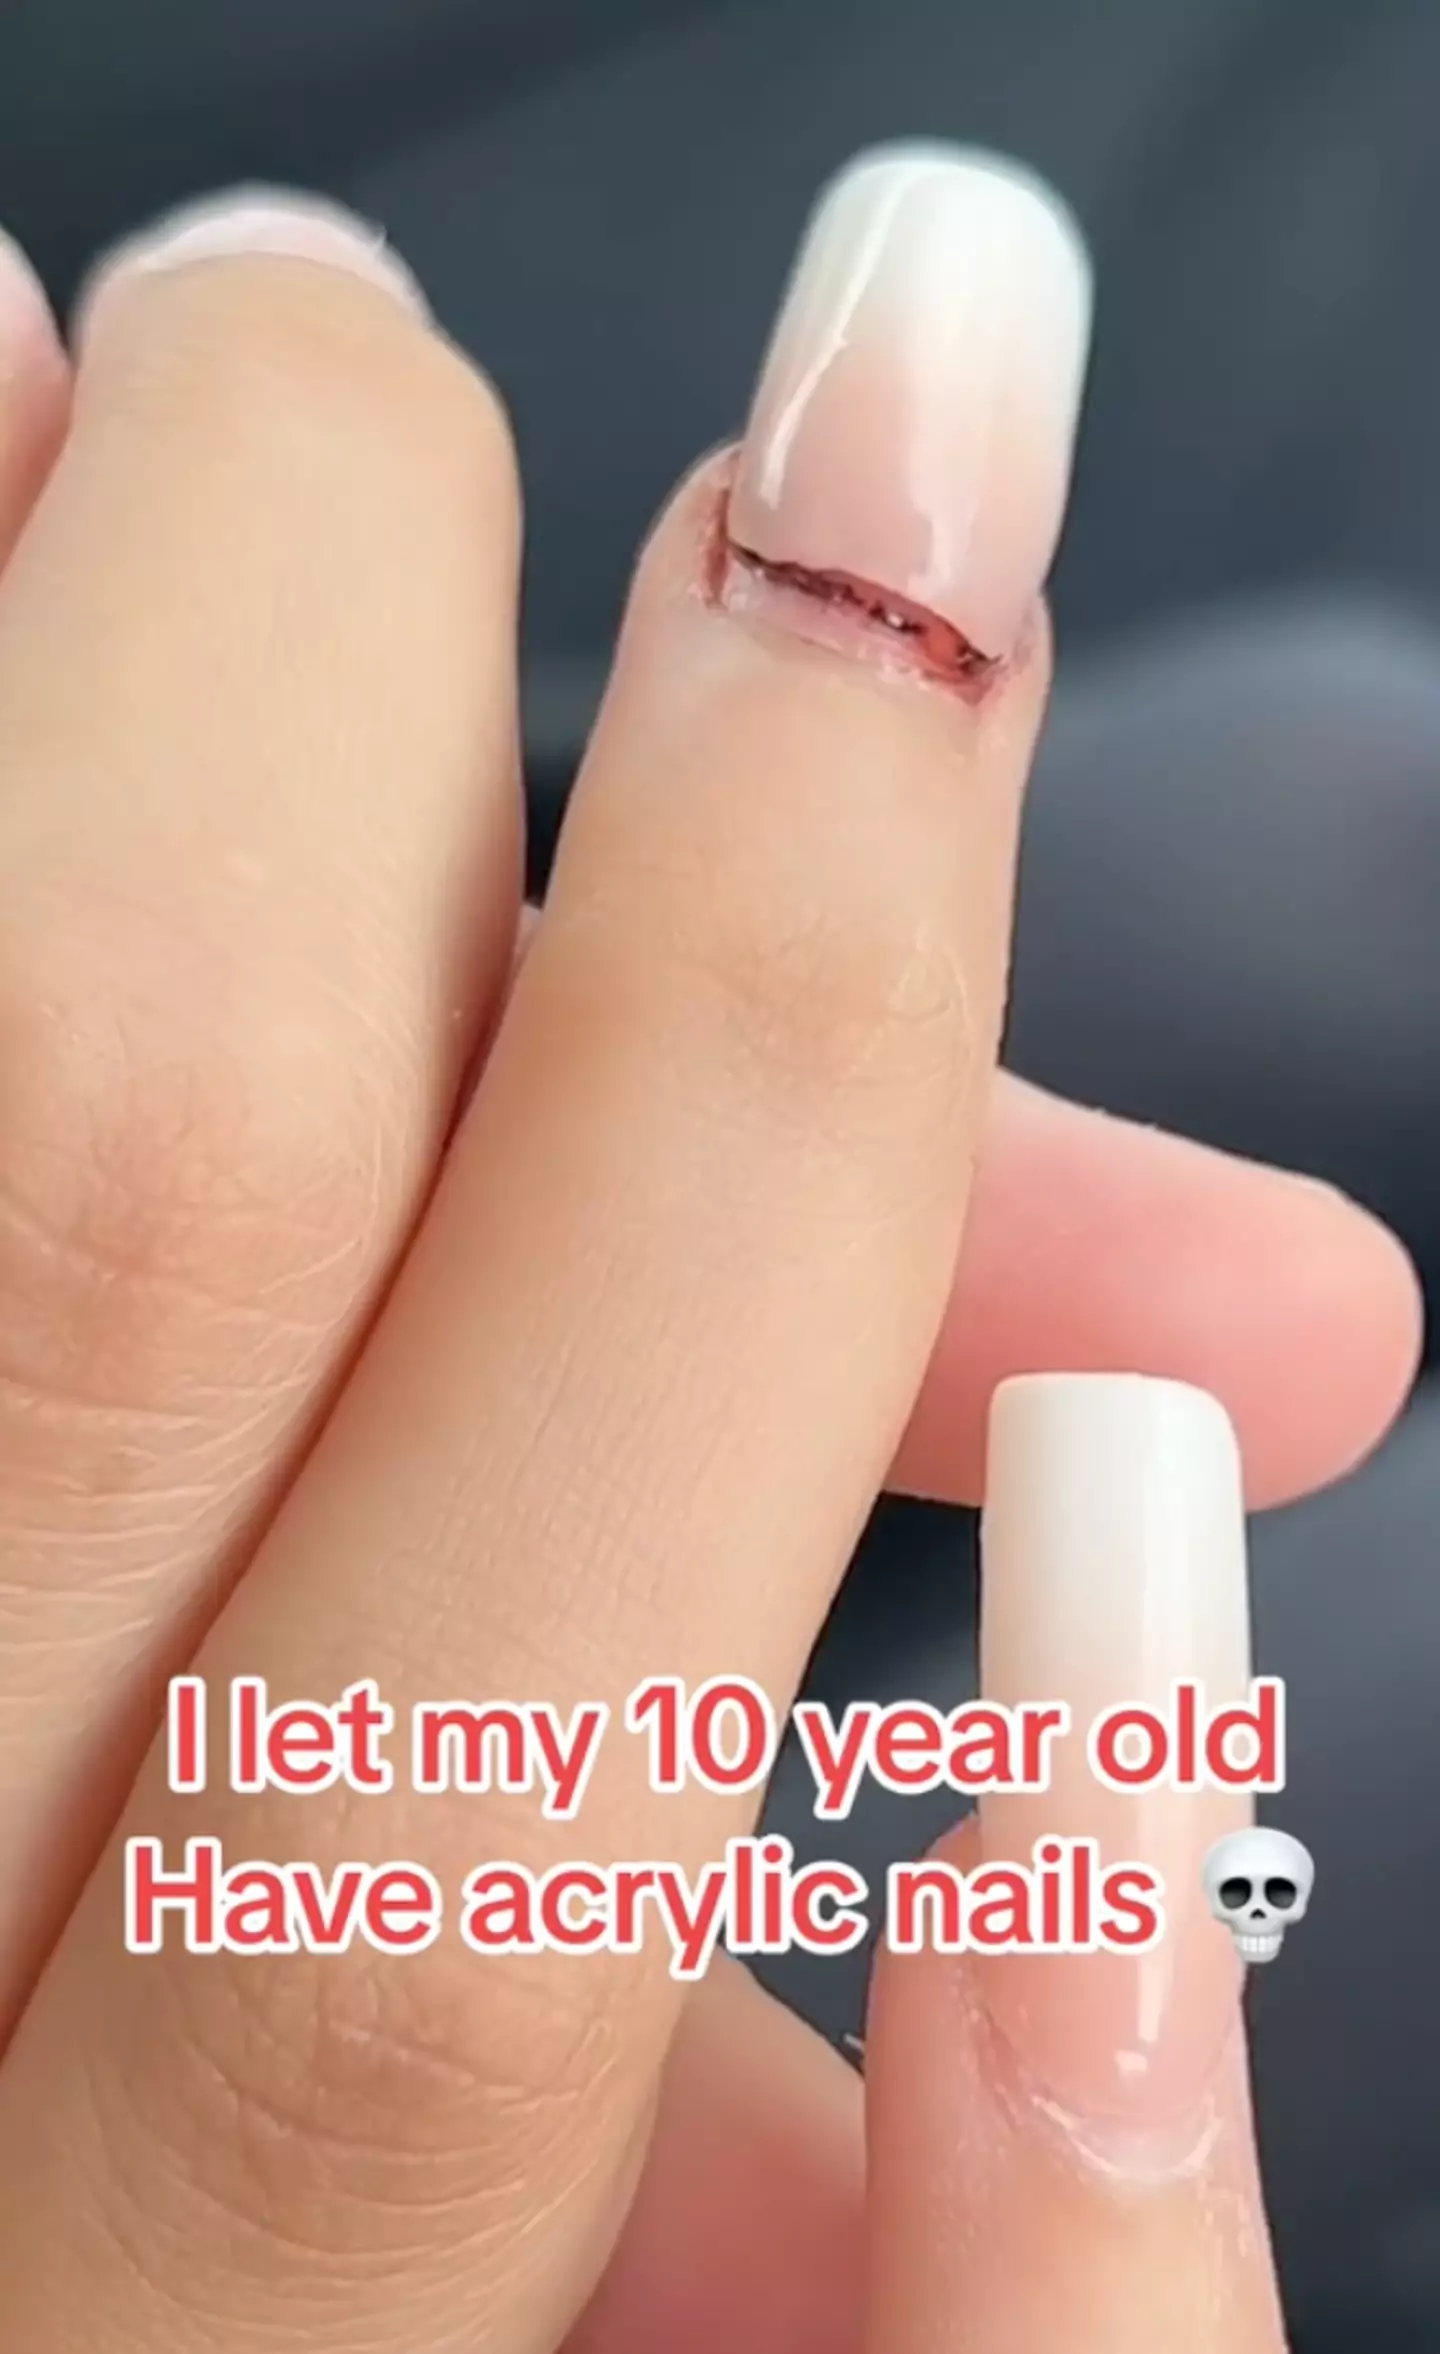 Acrylic nails are not advised for young girls.